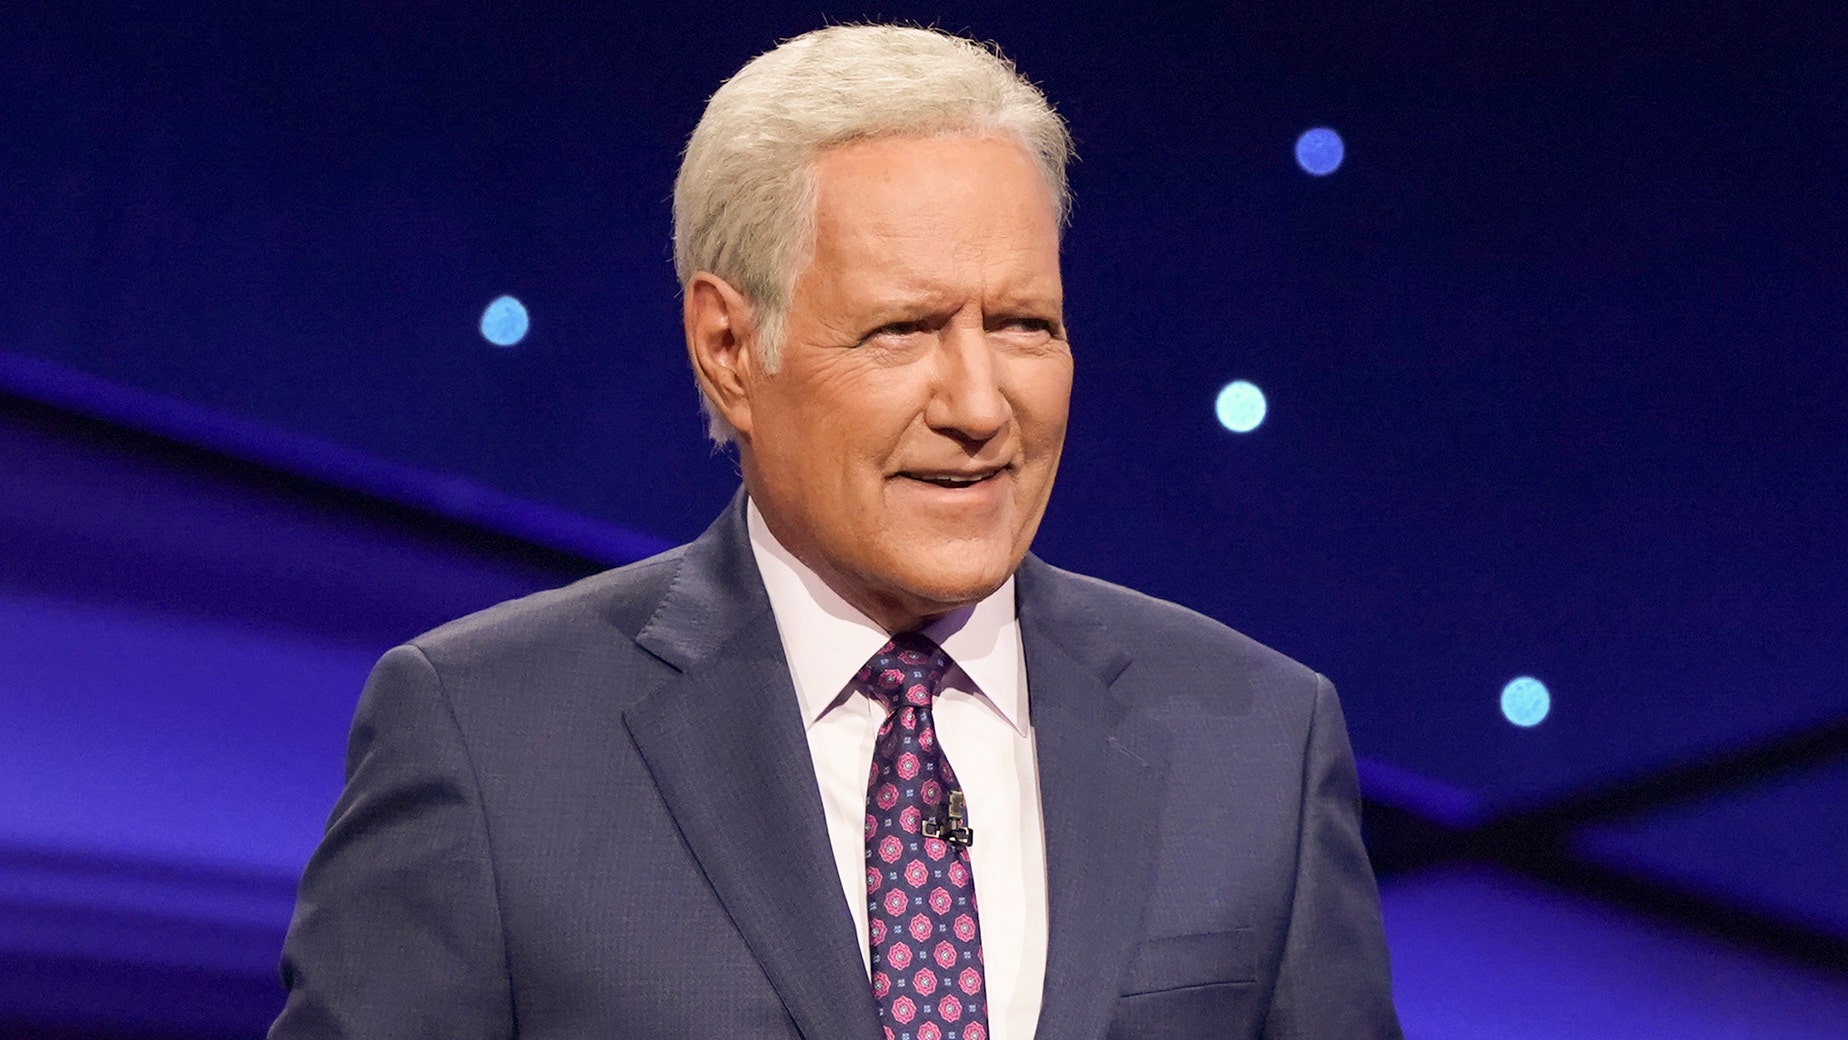 Alex Trebek earns posthumous Daytime Emmy nomination for last season hosting 'Jeopardy!' before death